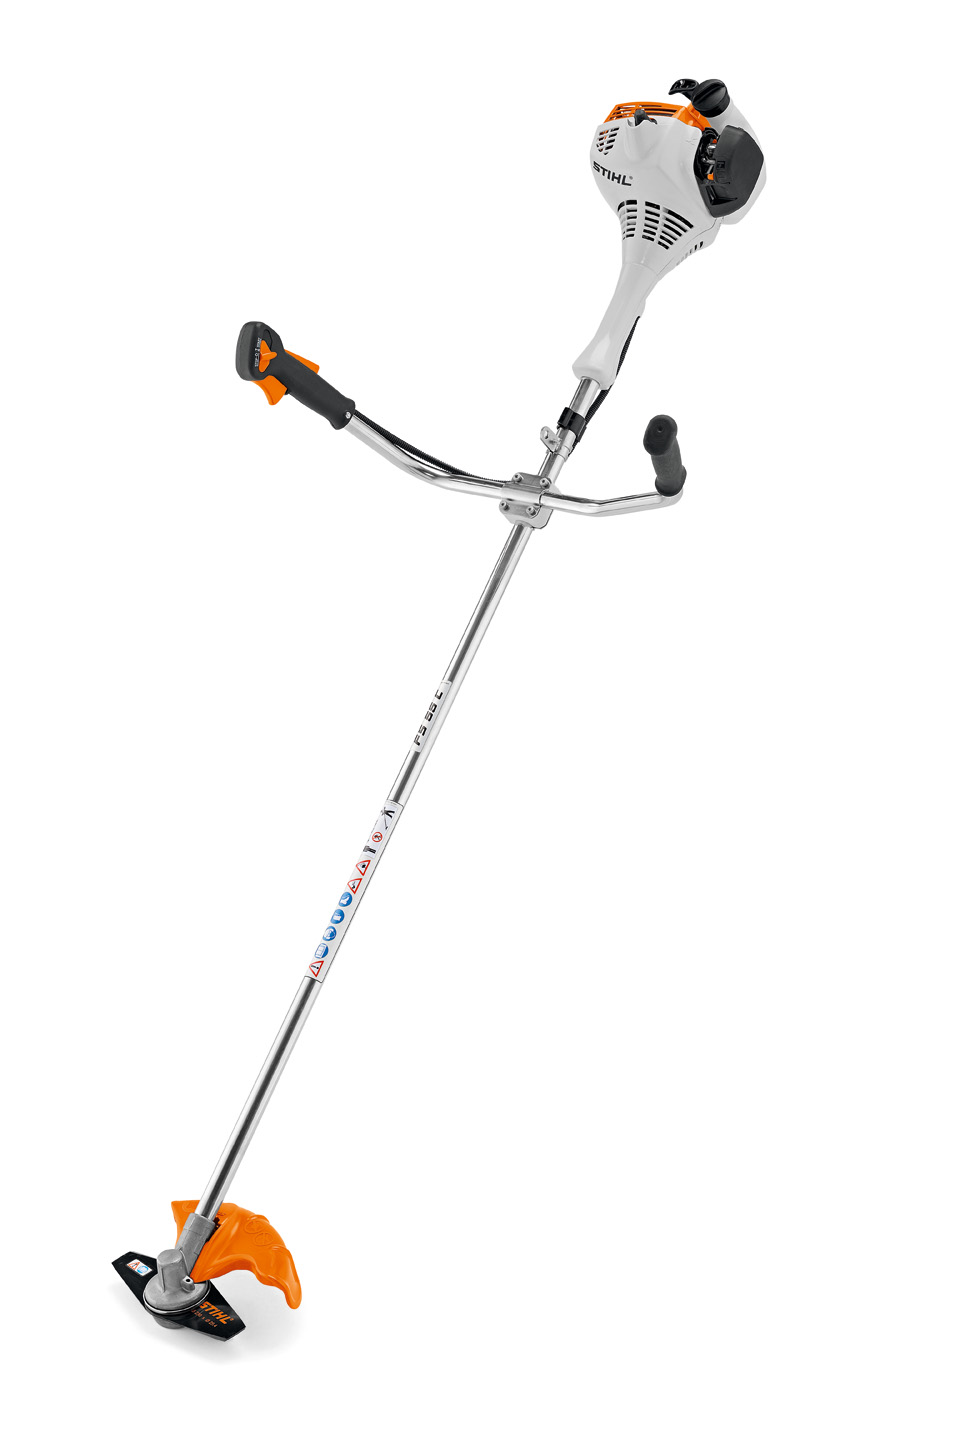 Stihl FS 55 petrol brush-cutter with cow-horn handles